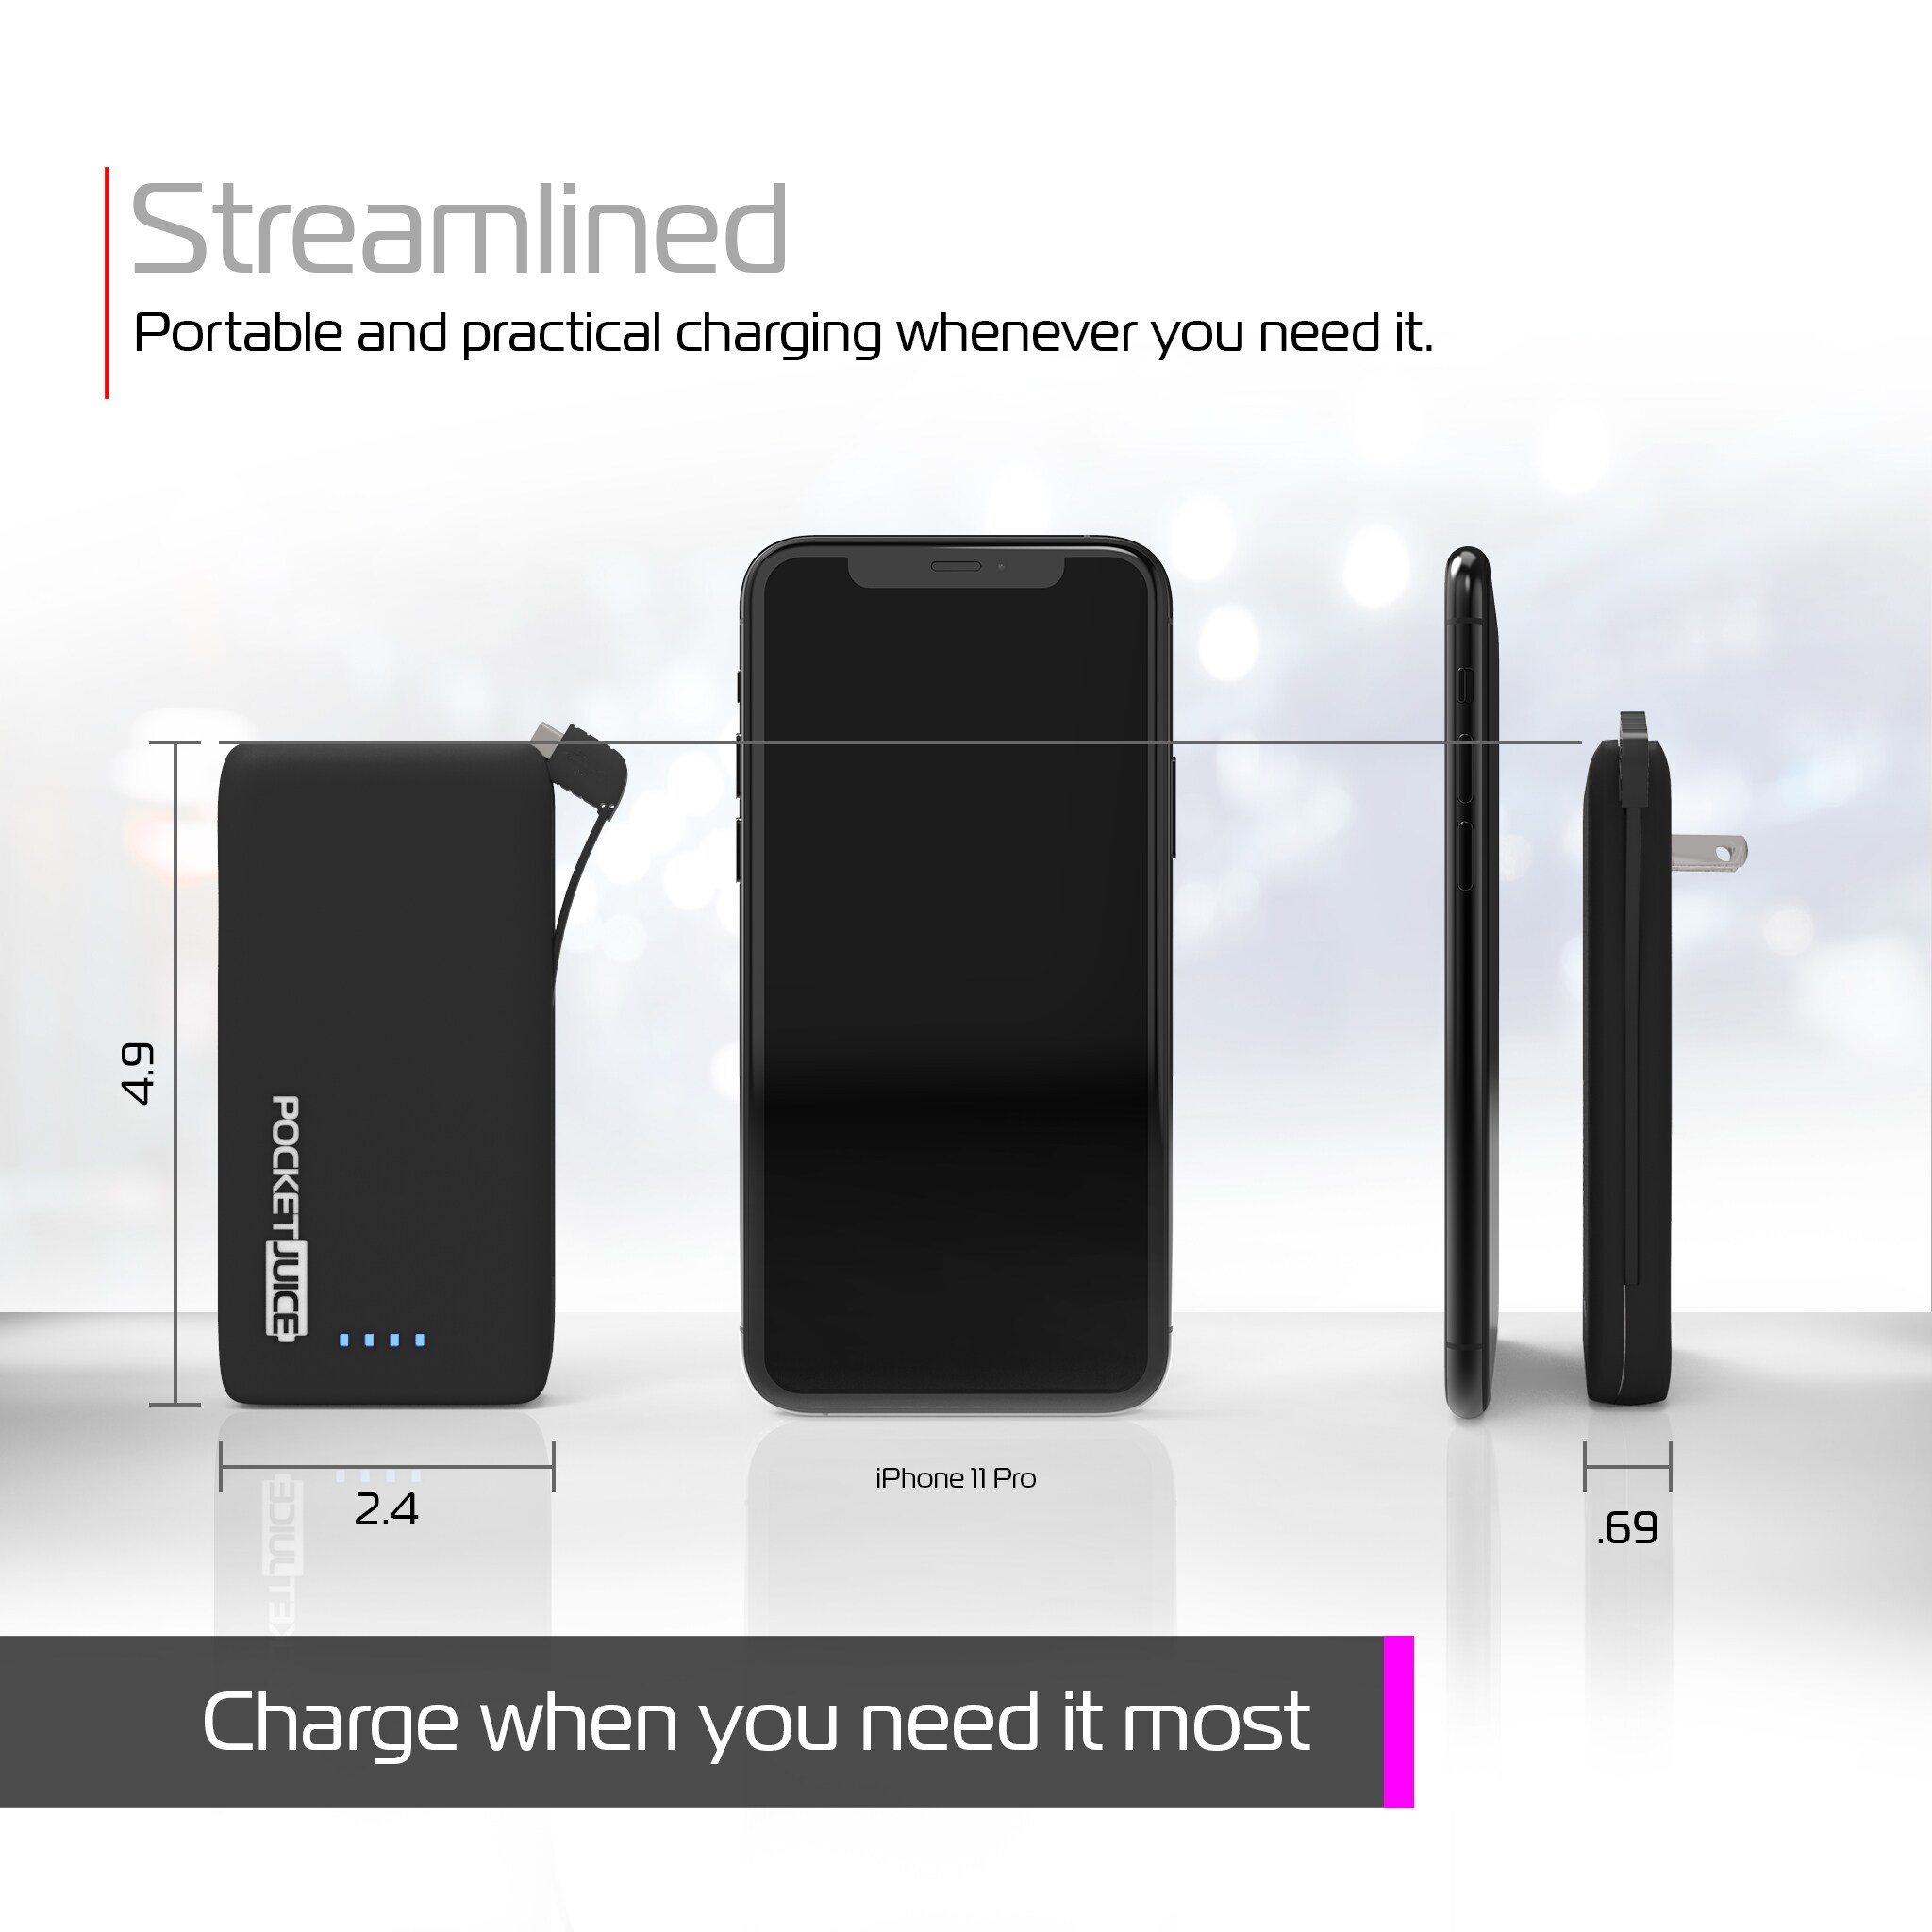 15,000mAh 5 Full Smartphone Charge Portable Power Bank from Juice